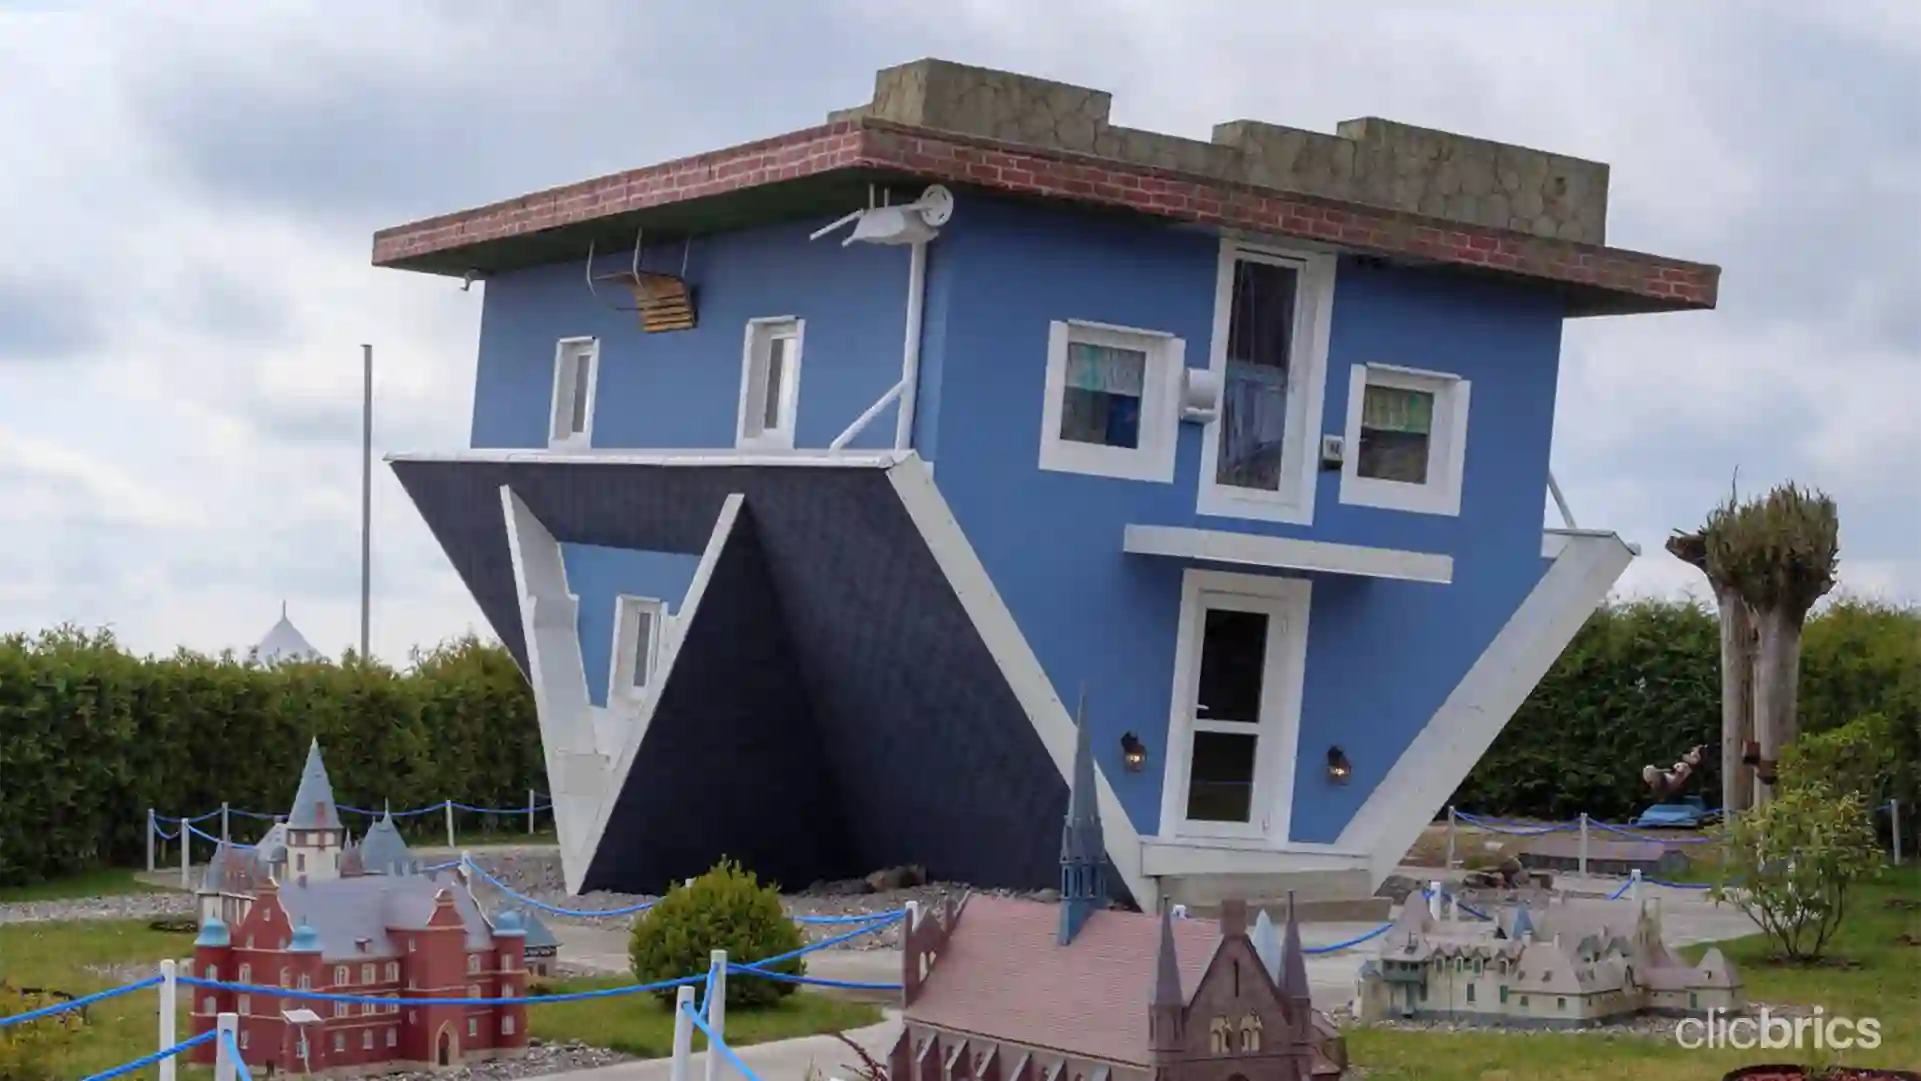 top 10 unique houses in the world